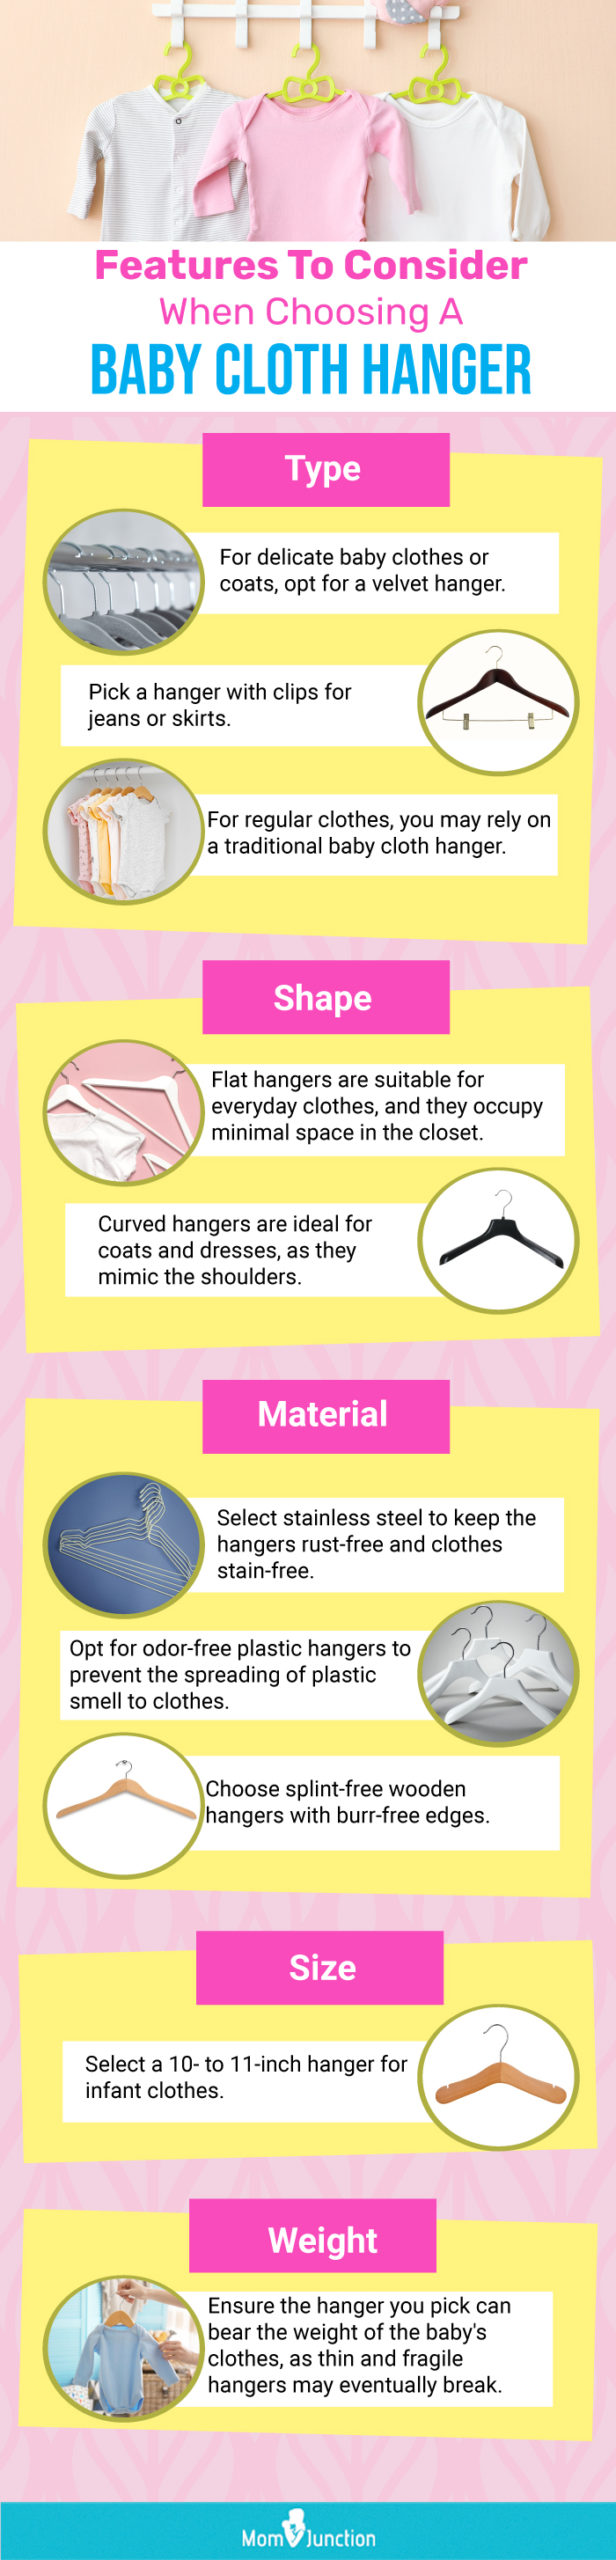 Features To Consider When Choosing A Baby Cloth Hanger